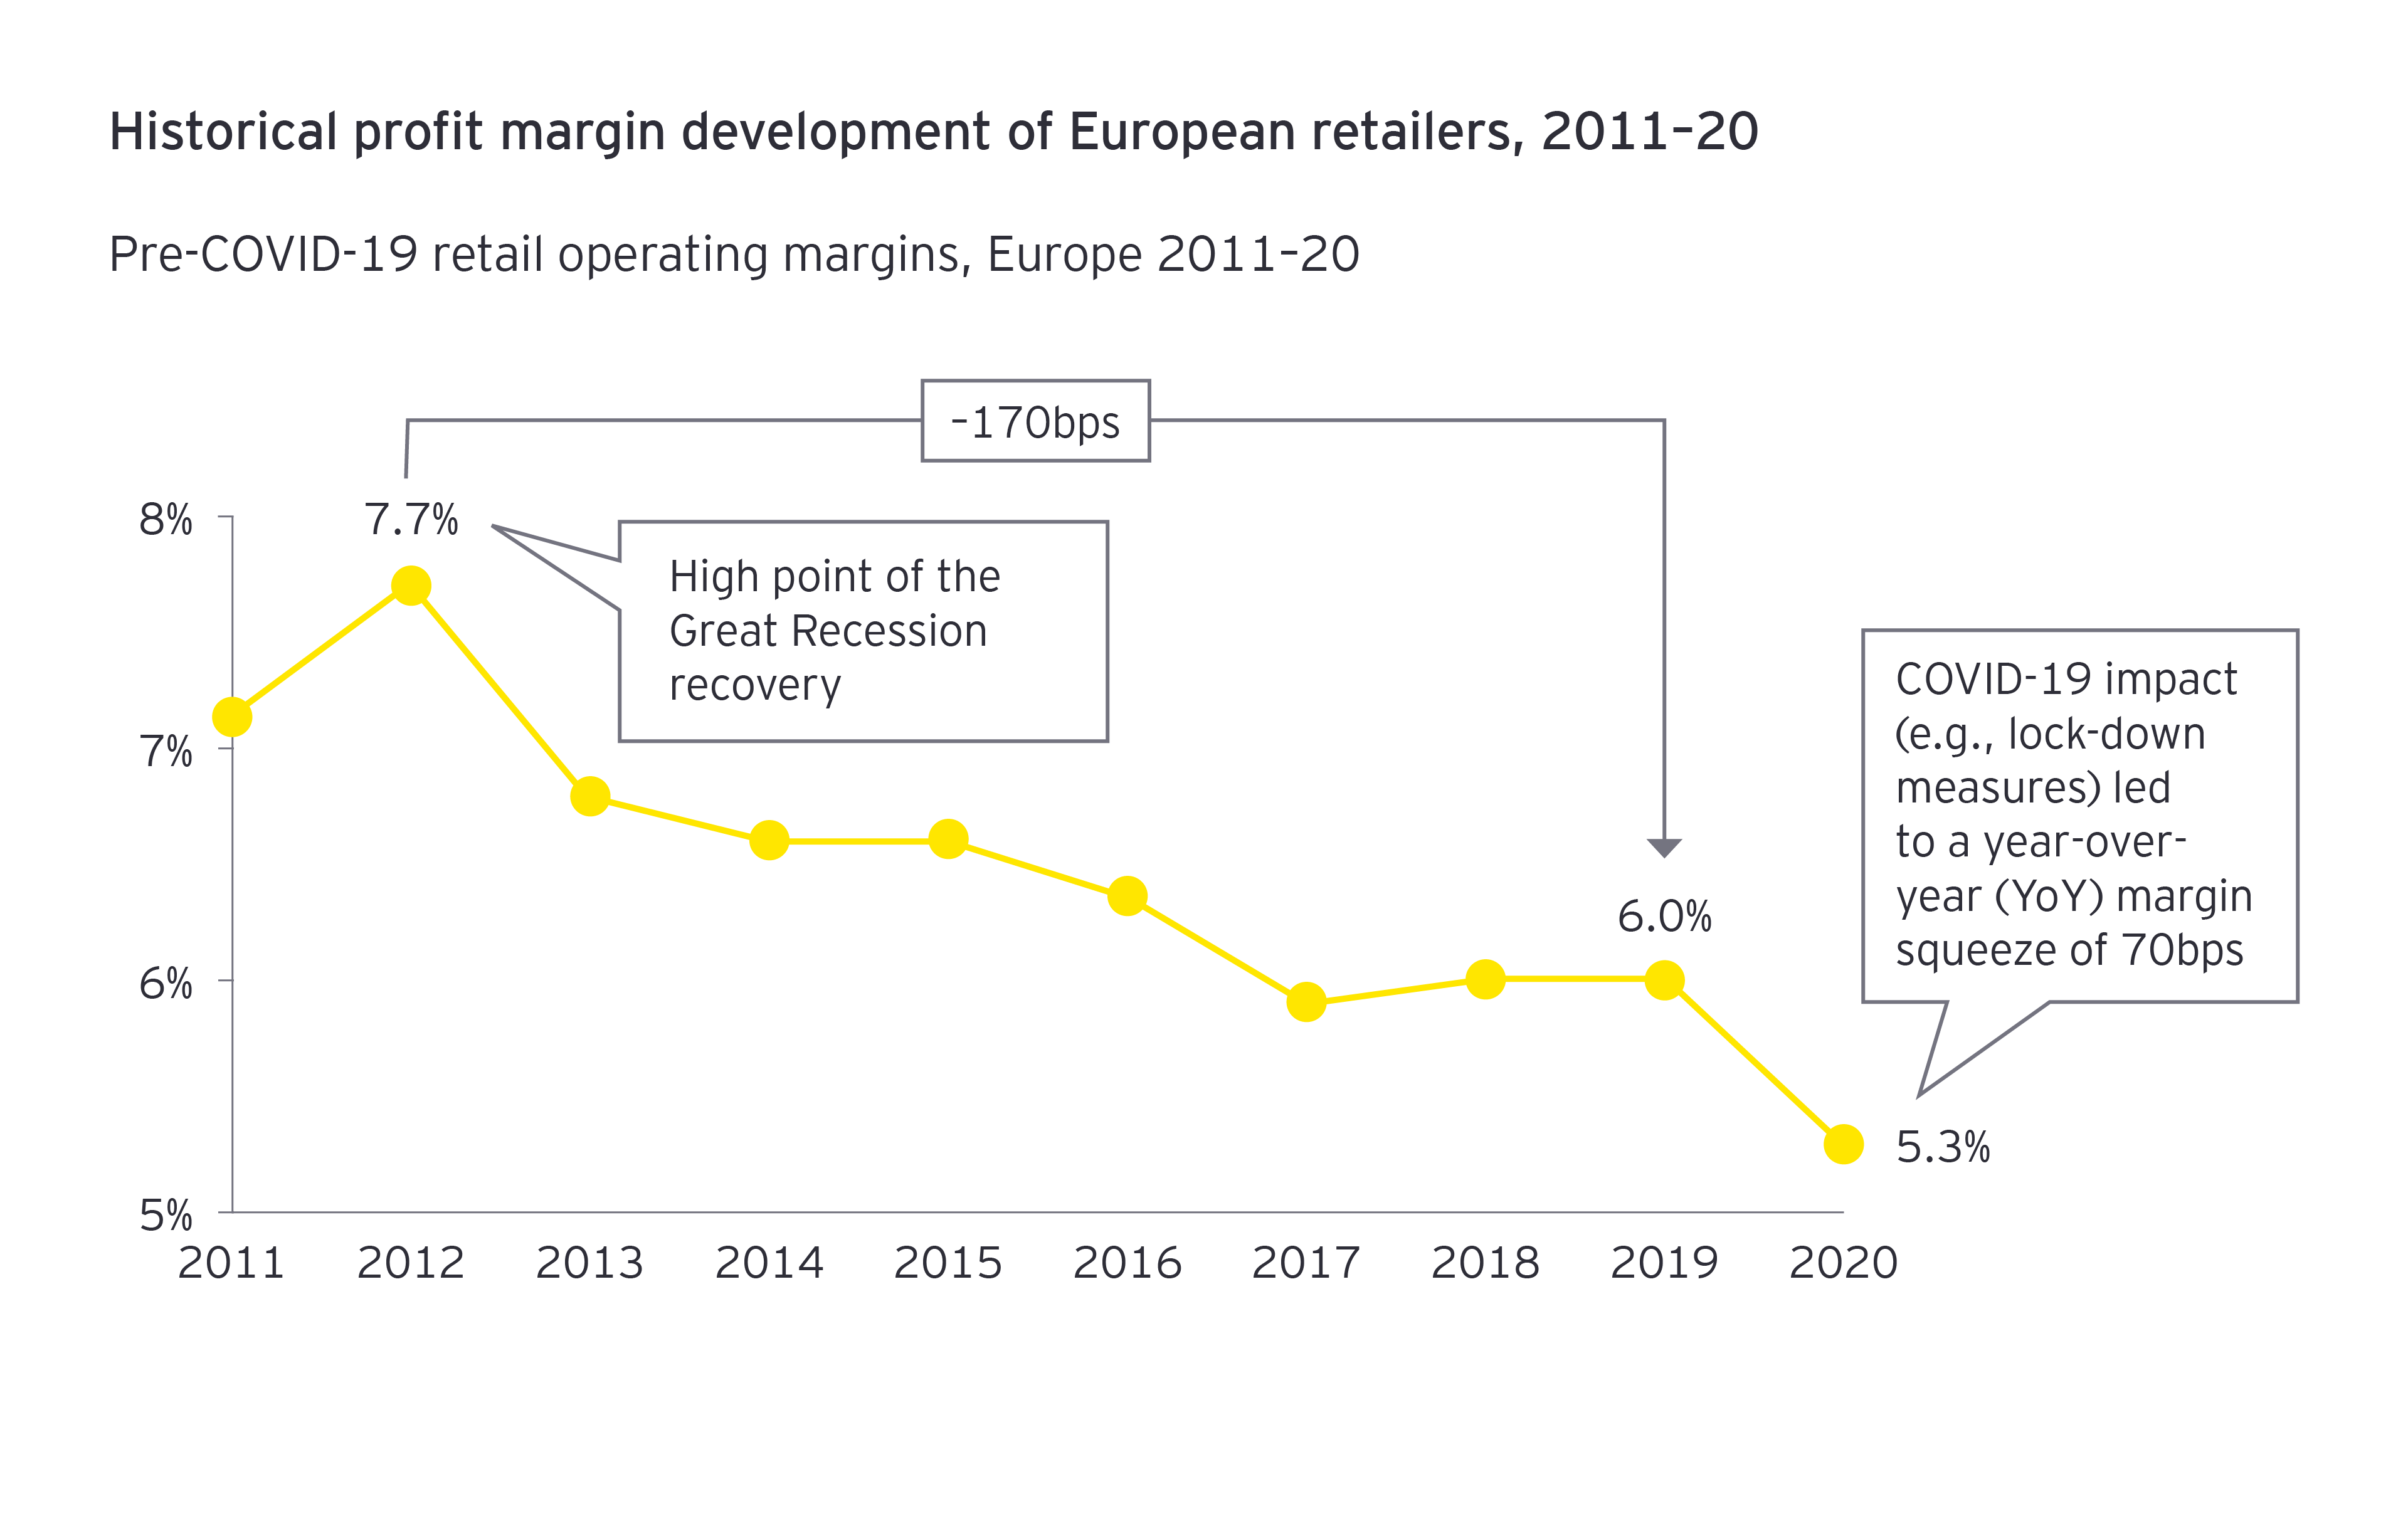 A line chart plotting the profit margins of European retailers from 2011 to 2020 shows their margins were the lowest in 2020 due to COVID-19.